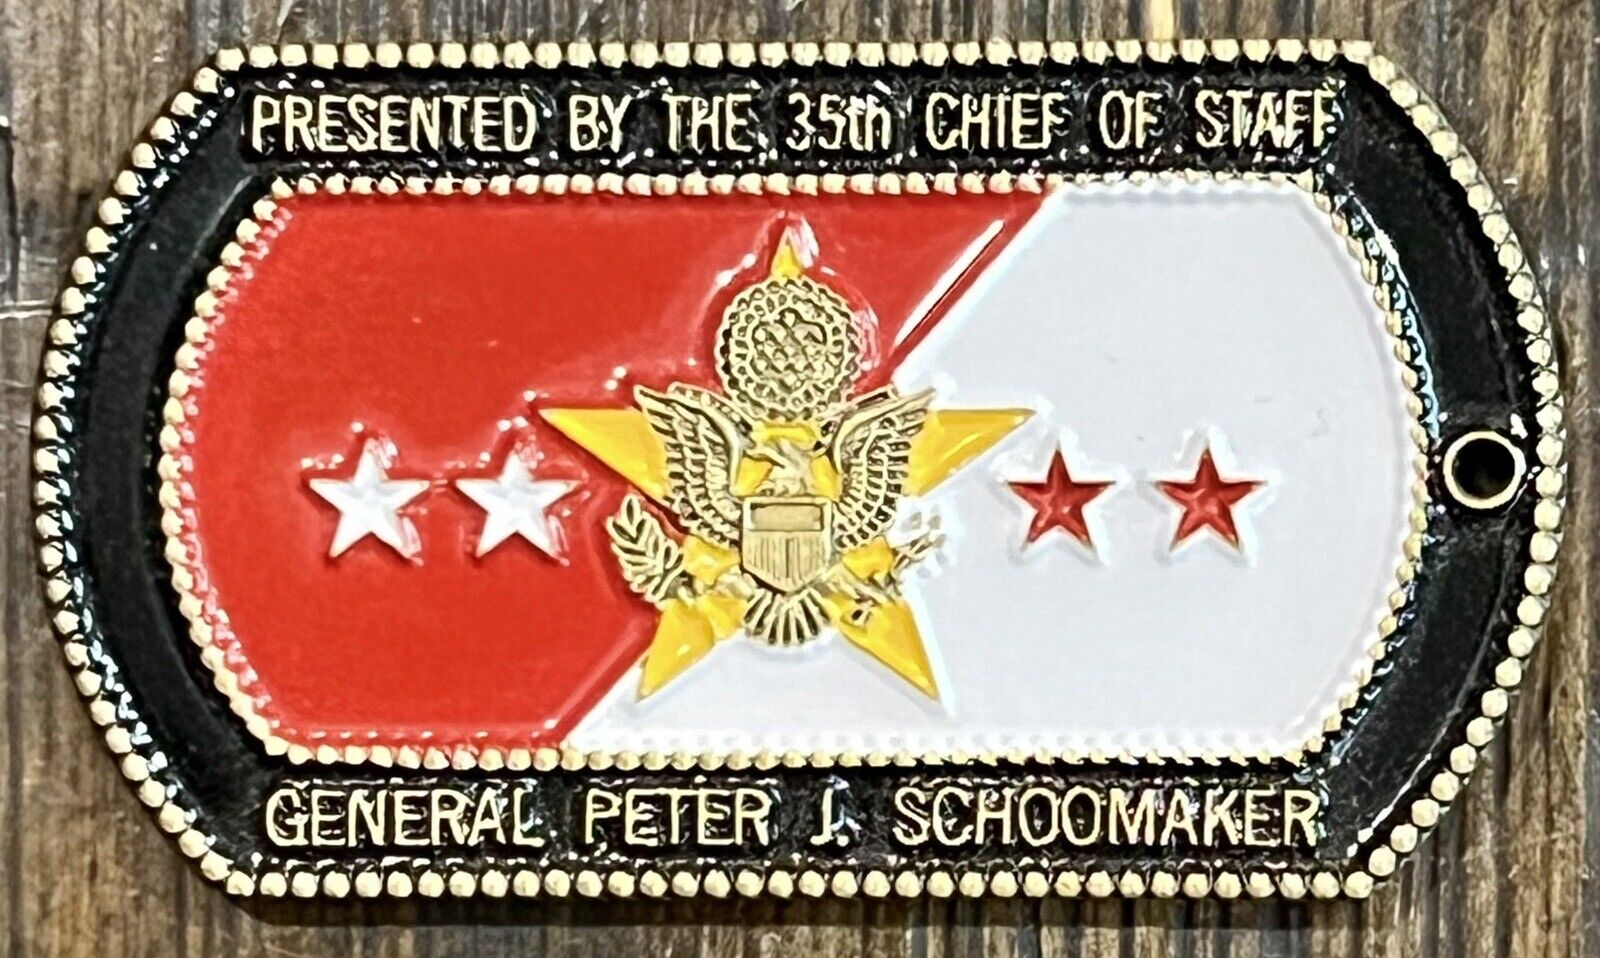 RARE General Peter J. Schoomaker 35th Army Chief of Staff Challenge Coin